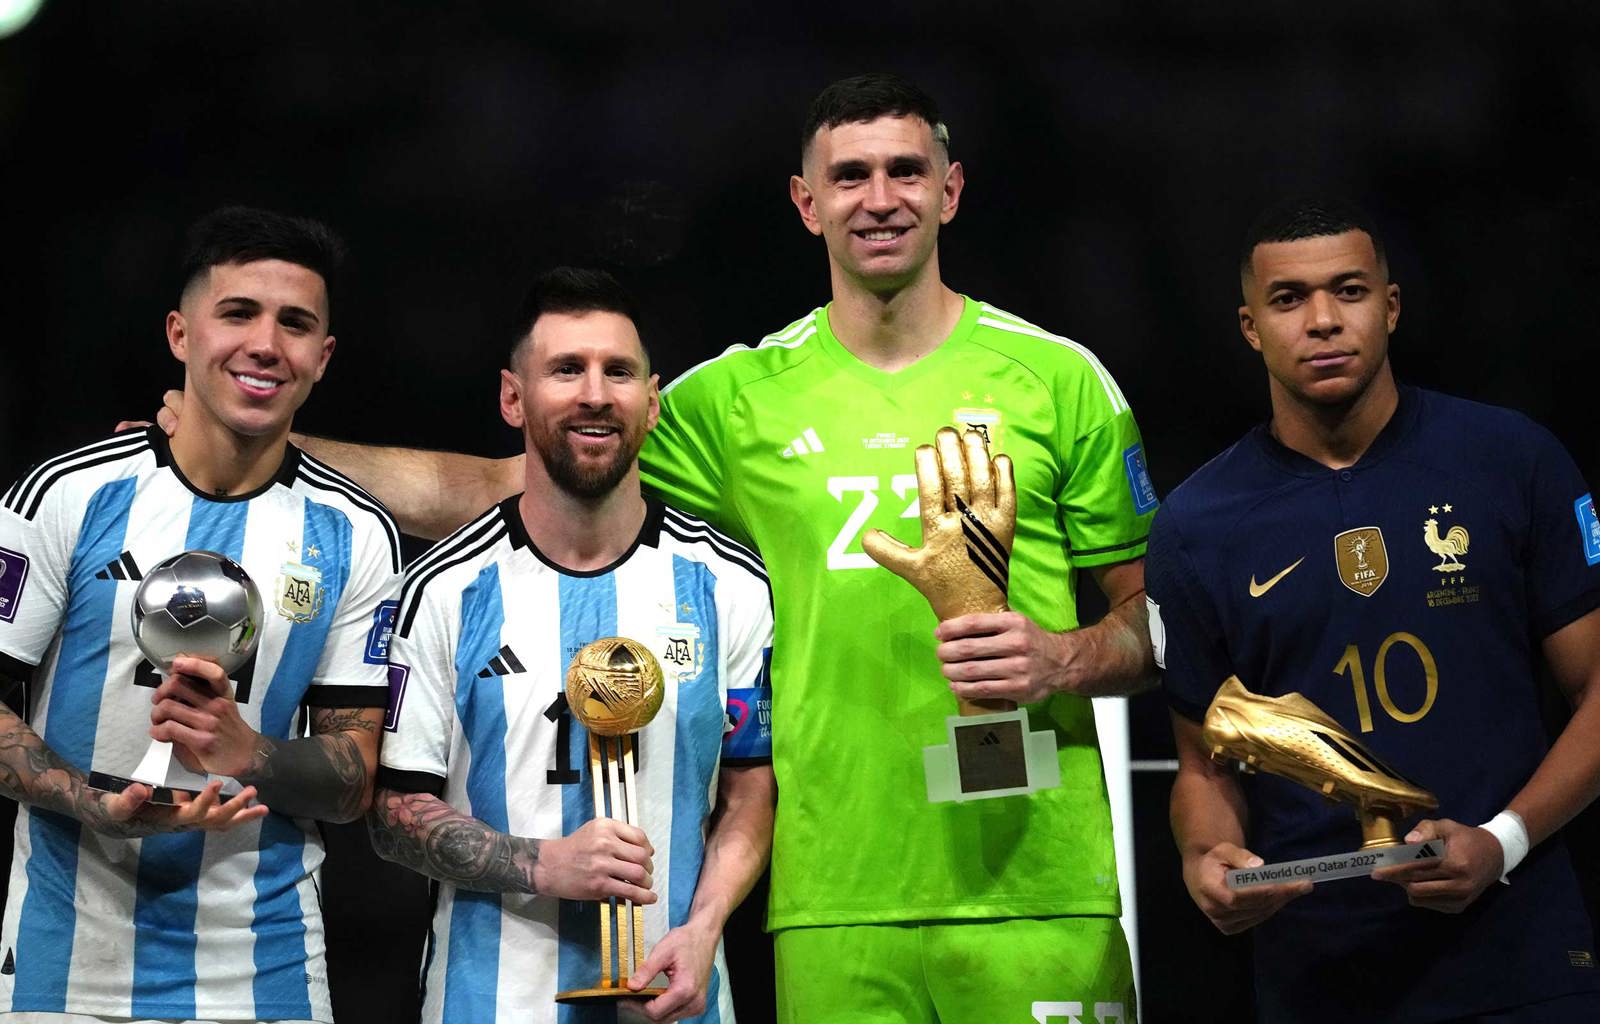 Players recognised with individual awards at 2022 World Cup FIFPRO